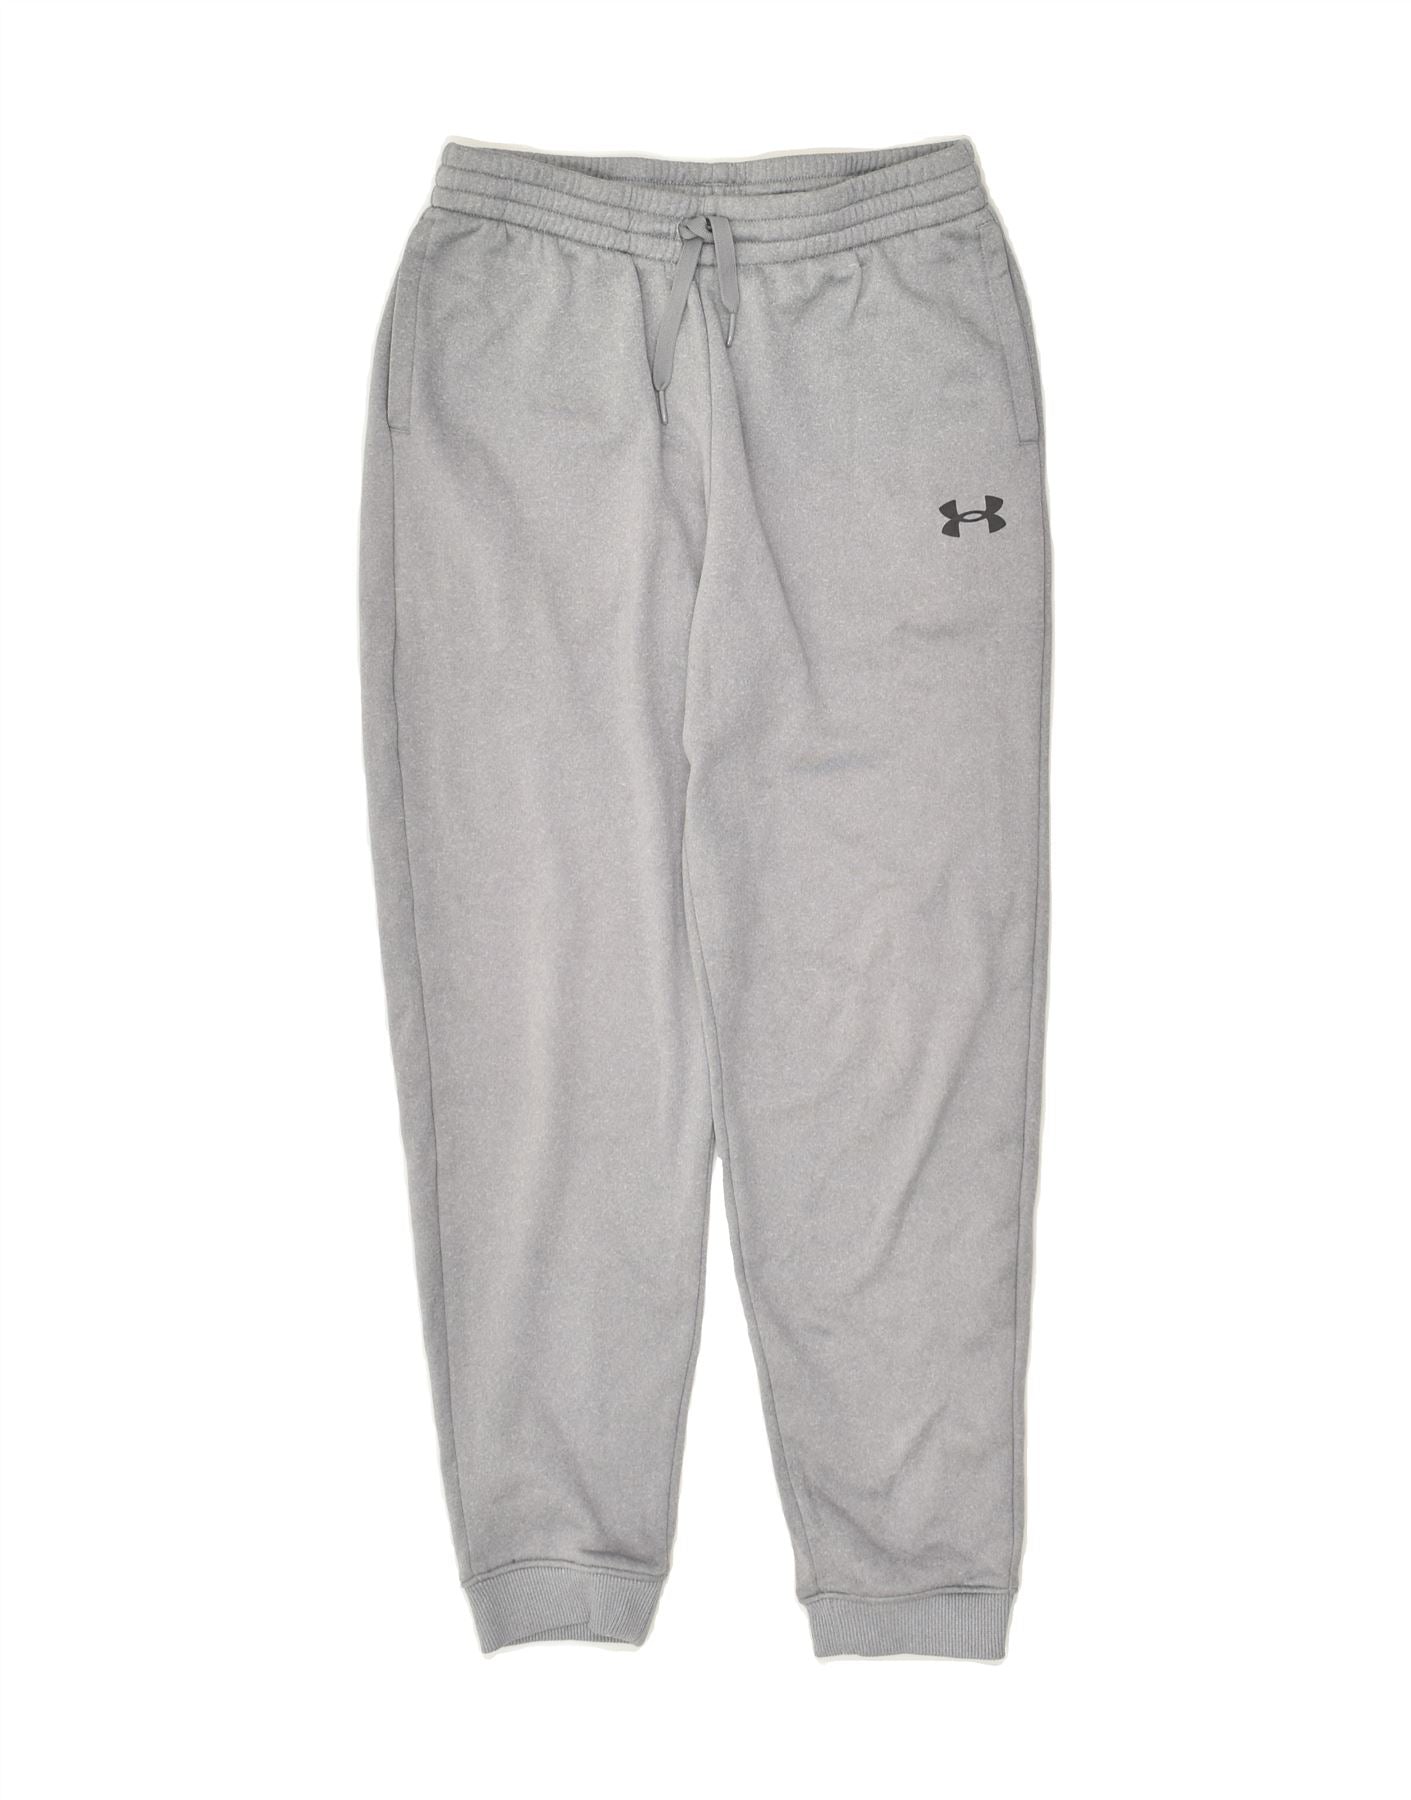 under armour sweatpants , sz. youth XL (fits the same